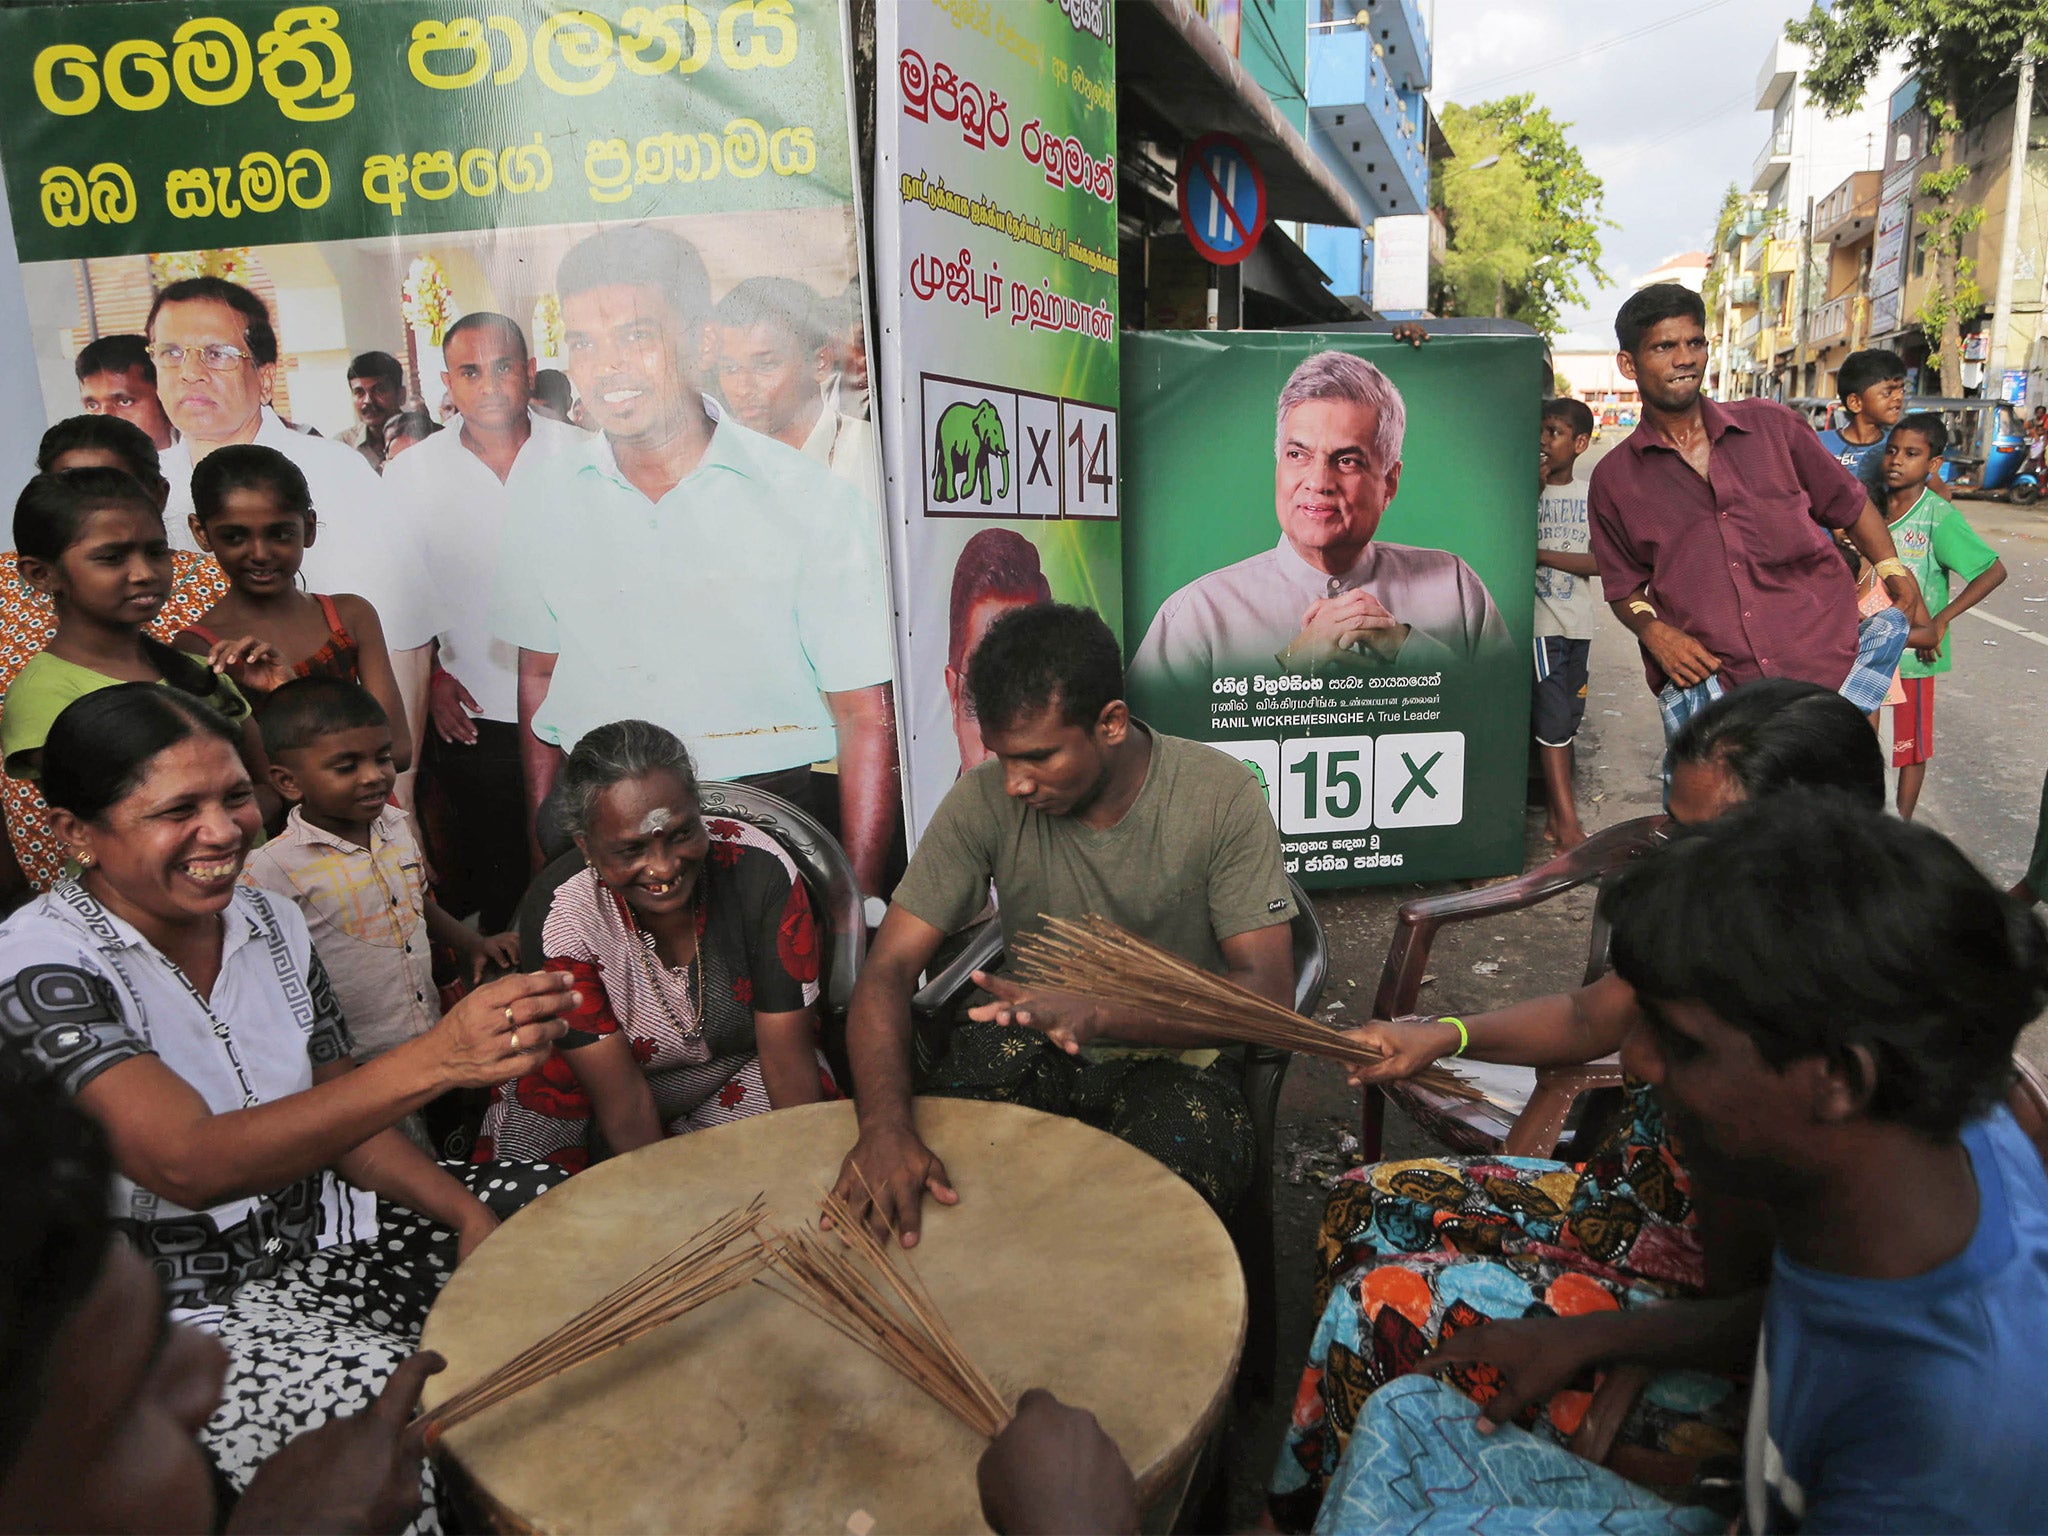 Supporters of Sri Lanka’s United National Party celebrate victory in Colombo